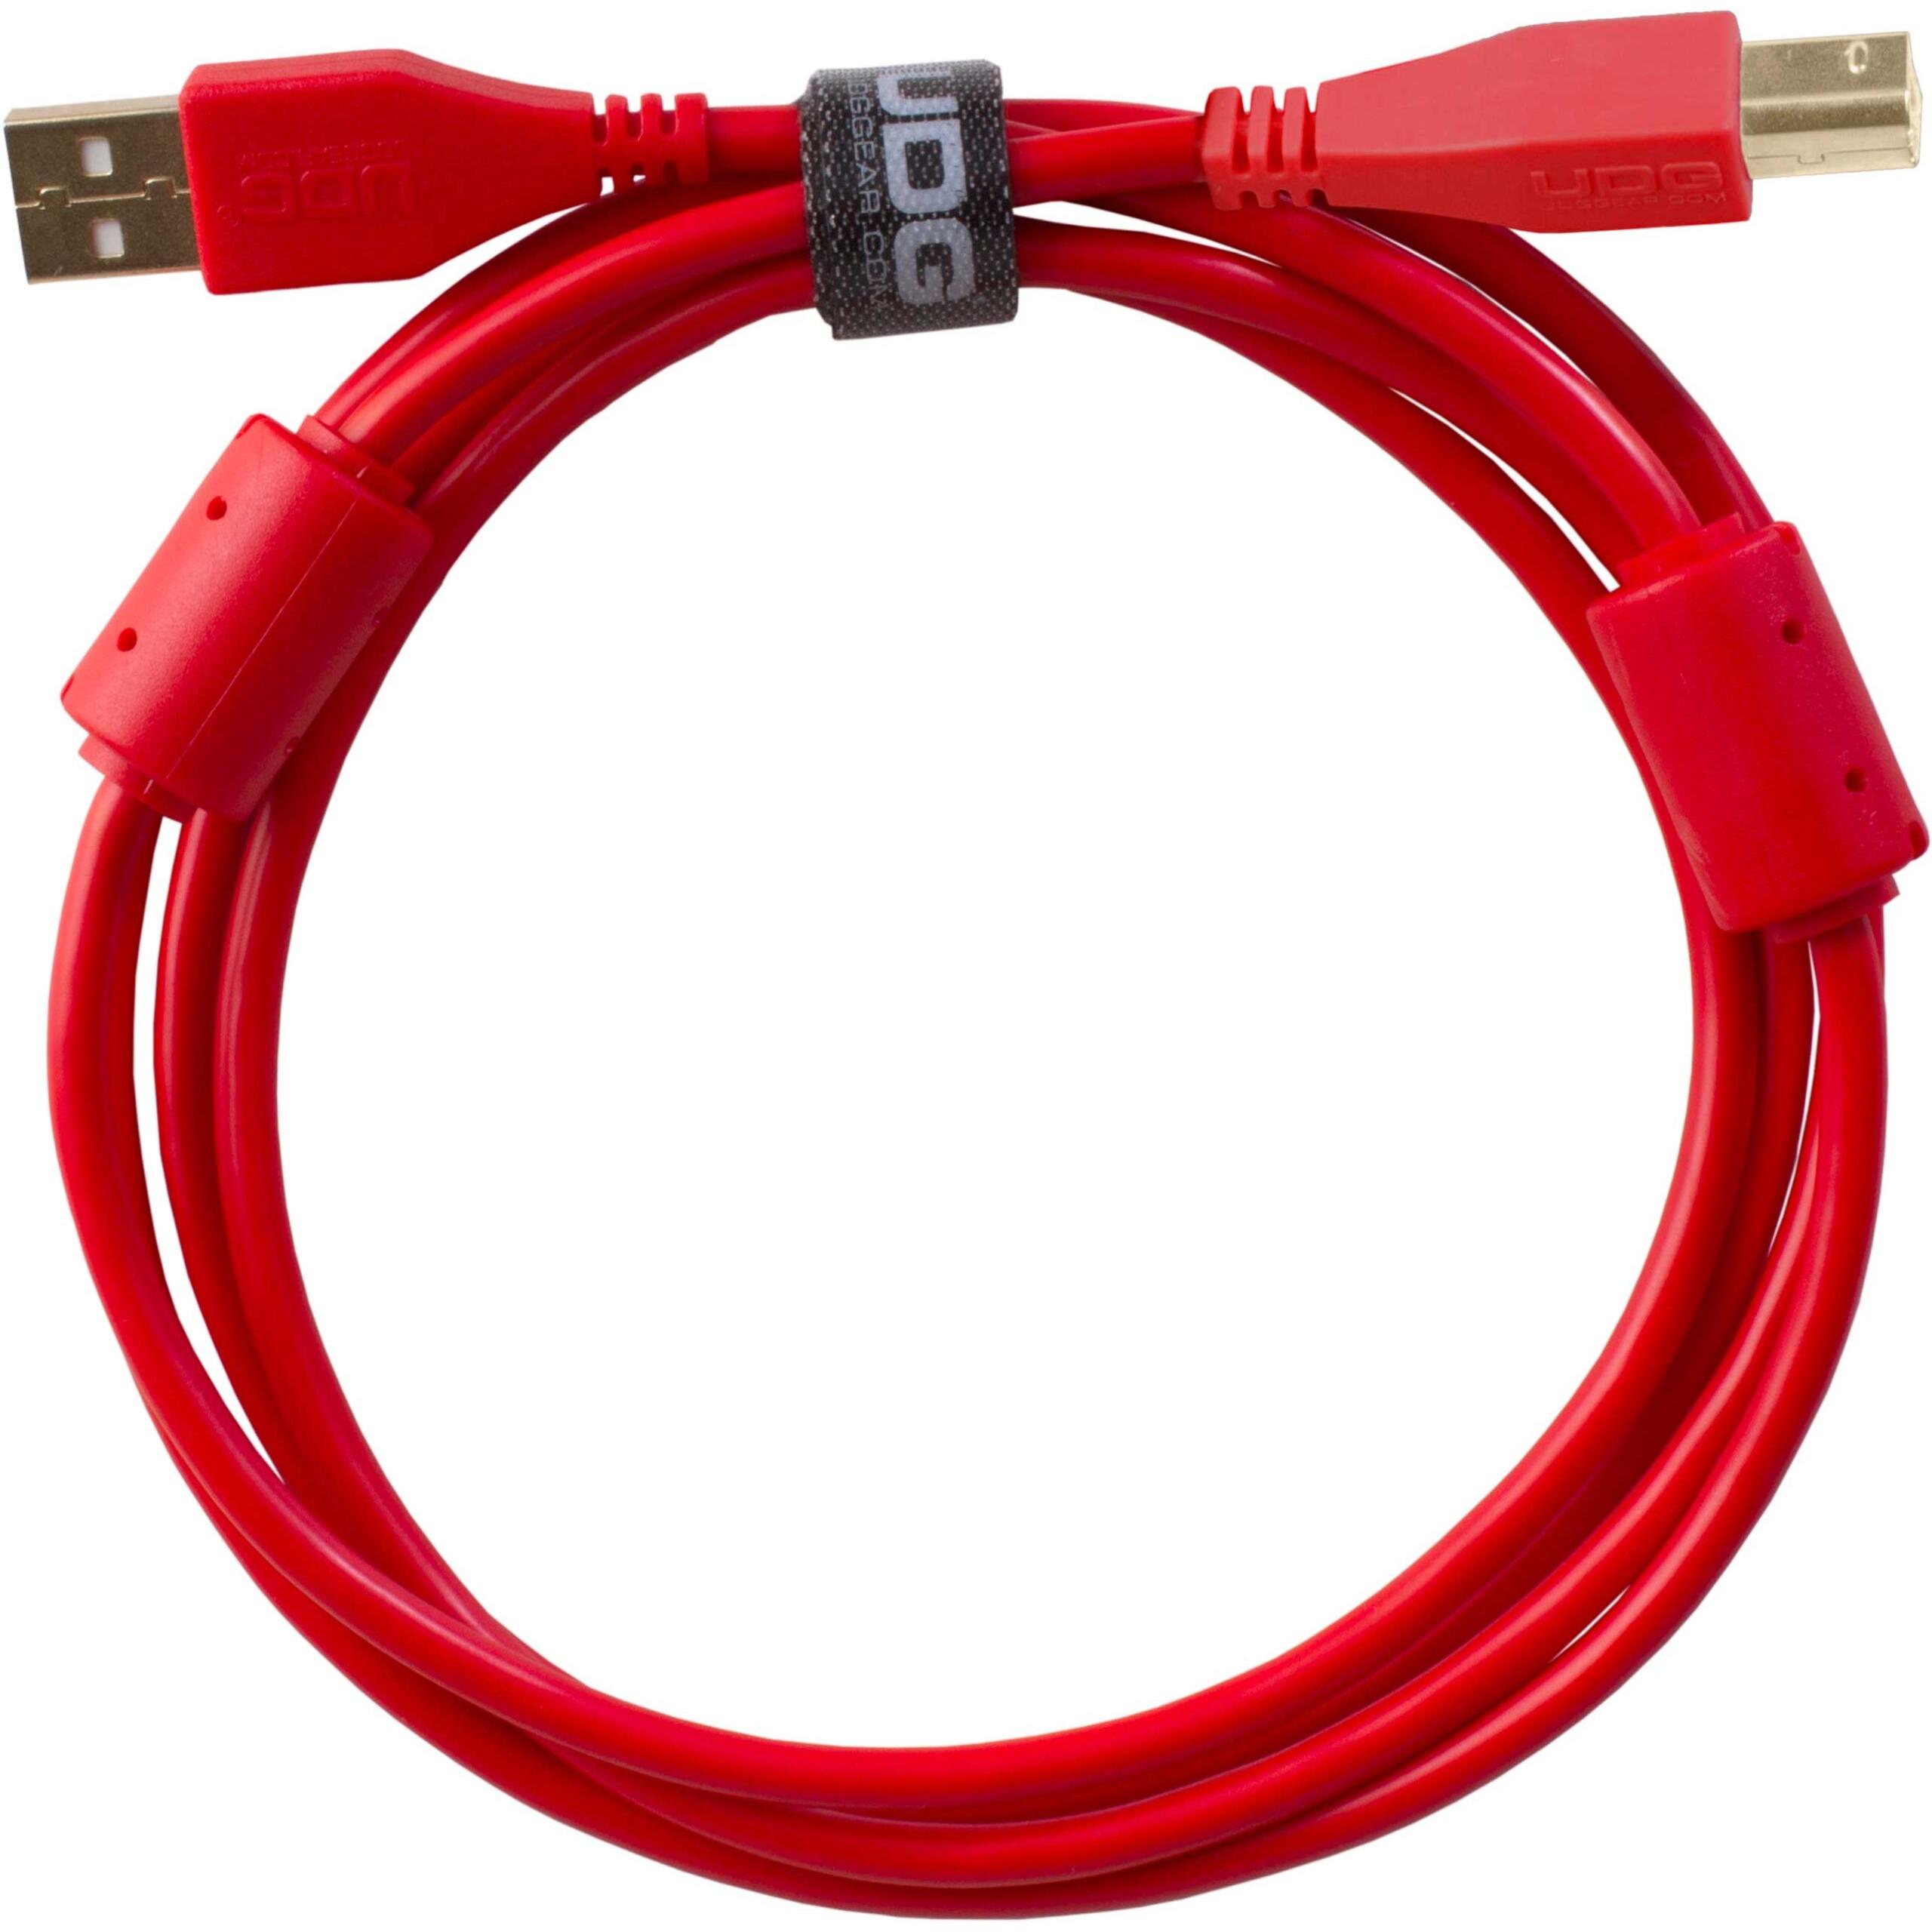 UDG U95002RD - ULTIMATE AUDIO CABLE USB 2.0 A-B RED STRAIGHT 2M